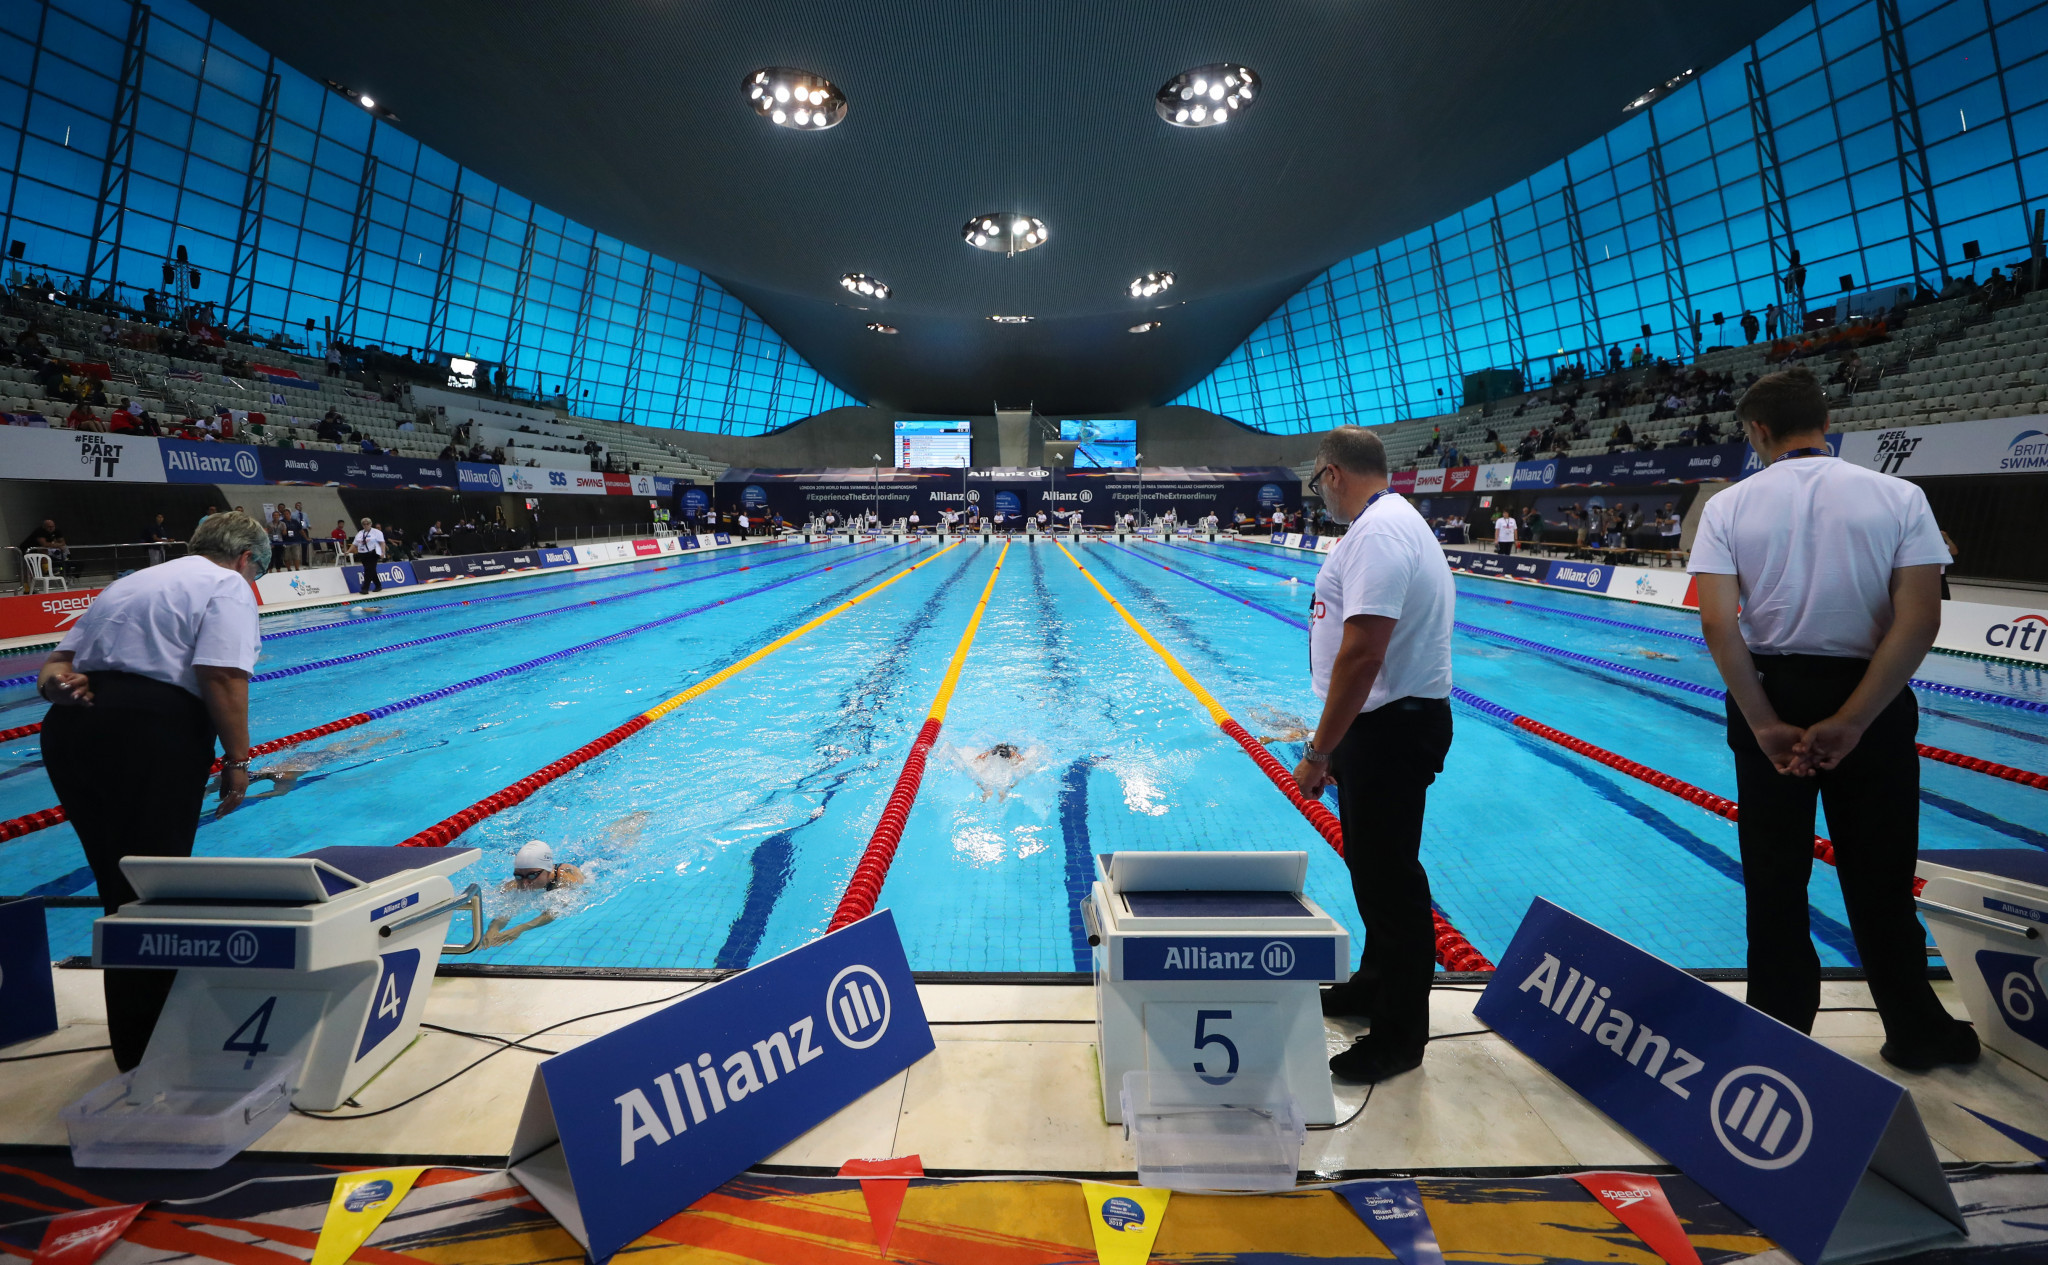 The 2019 World Para Swimming Championships have begun in London ©Getty Images